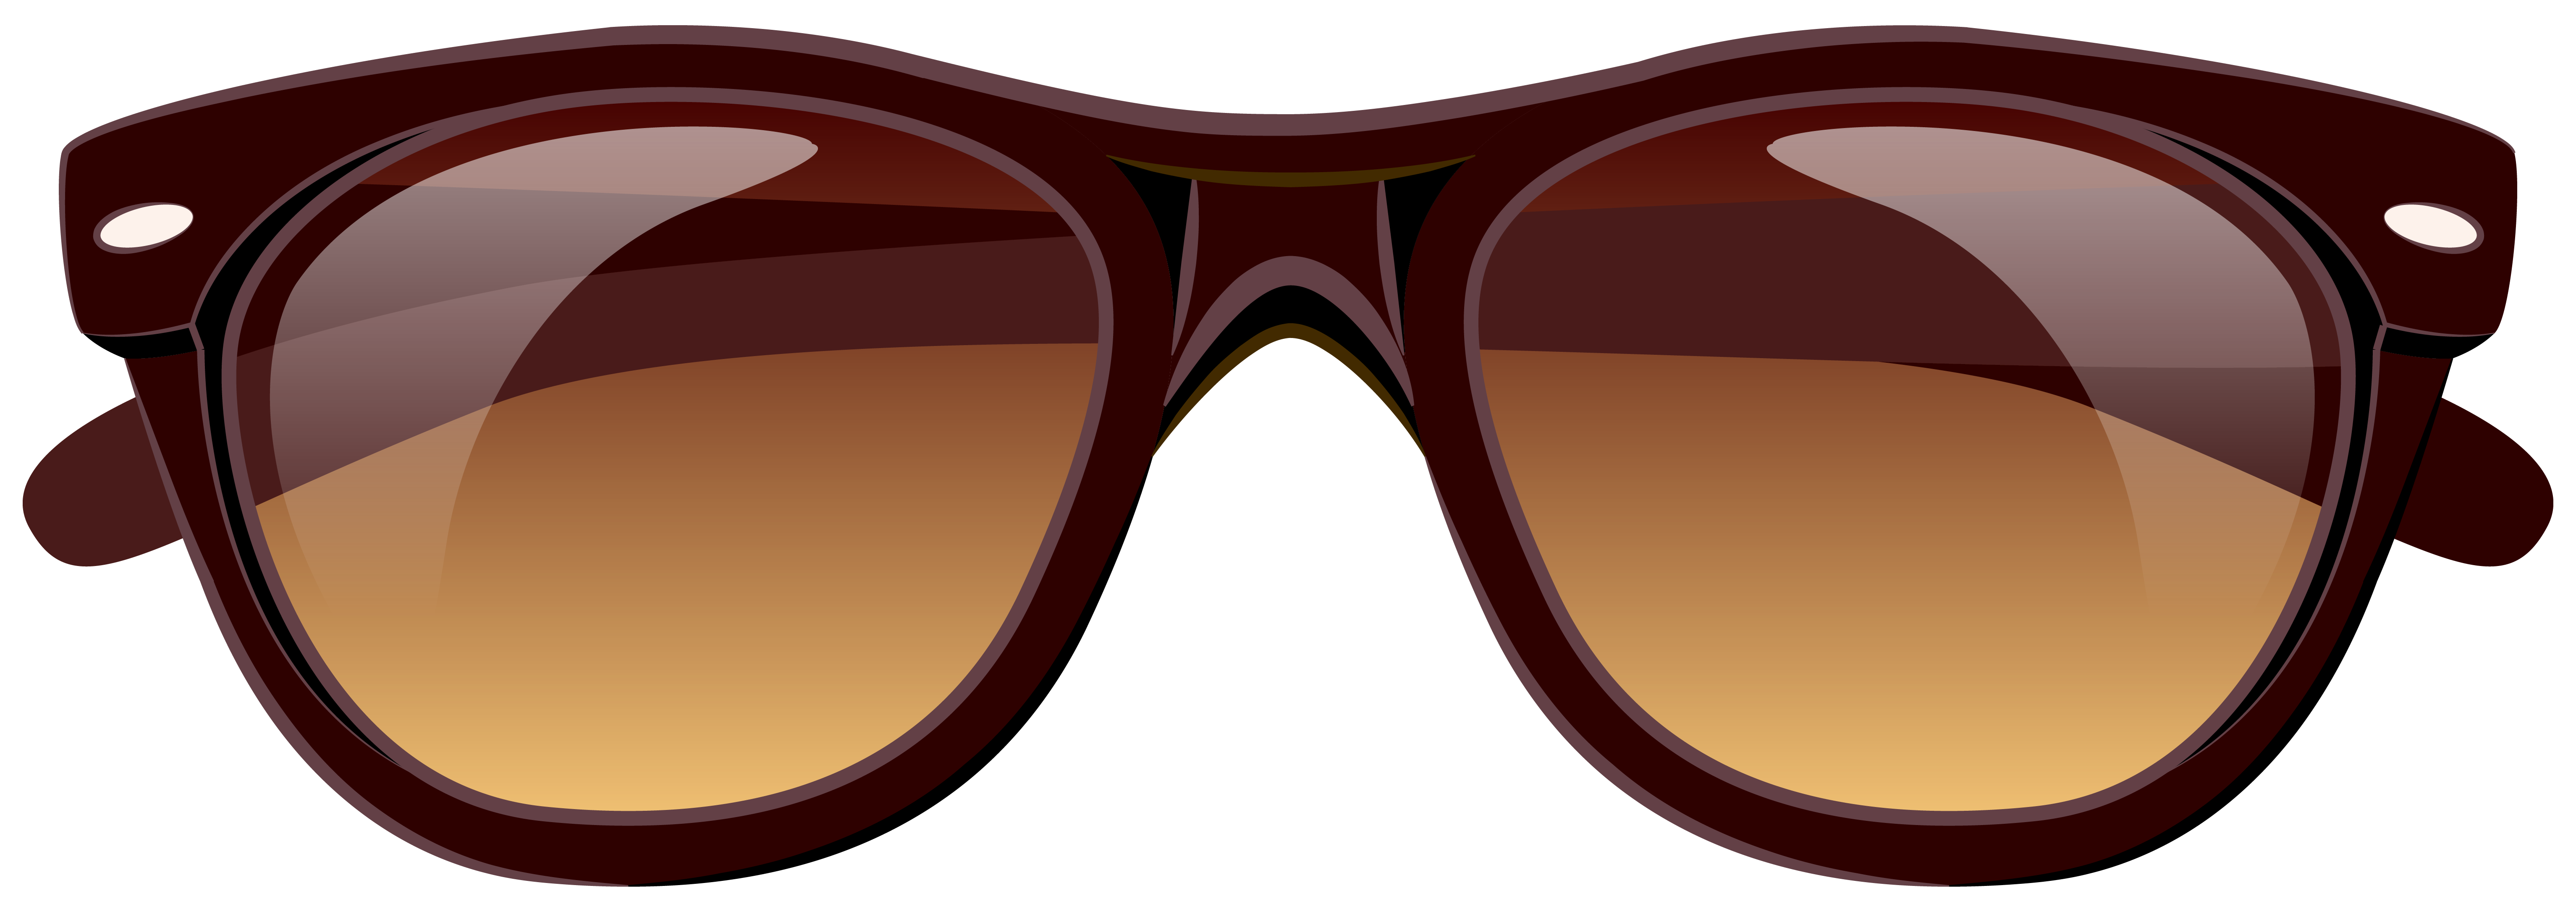 Brown sunglasses png picture. Clipart glasses sunglass